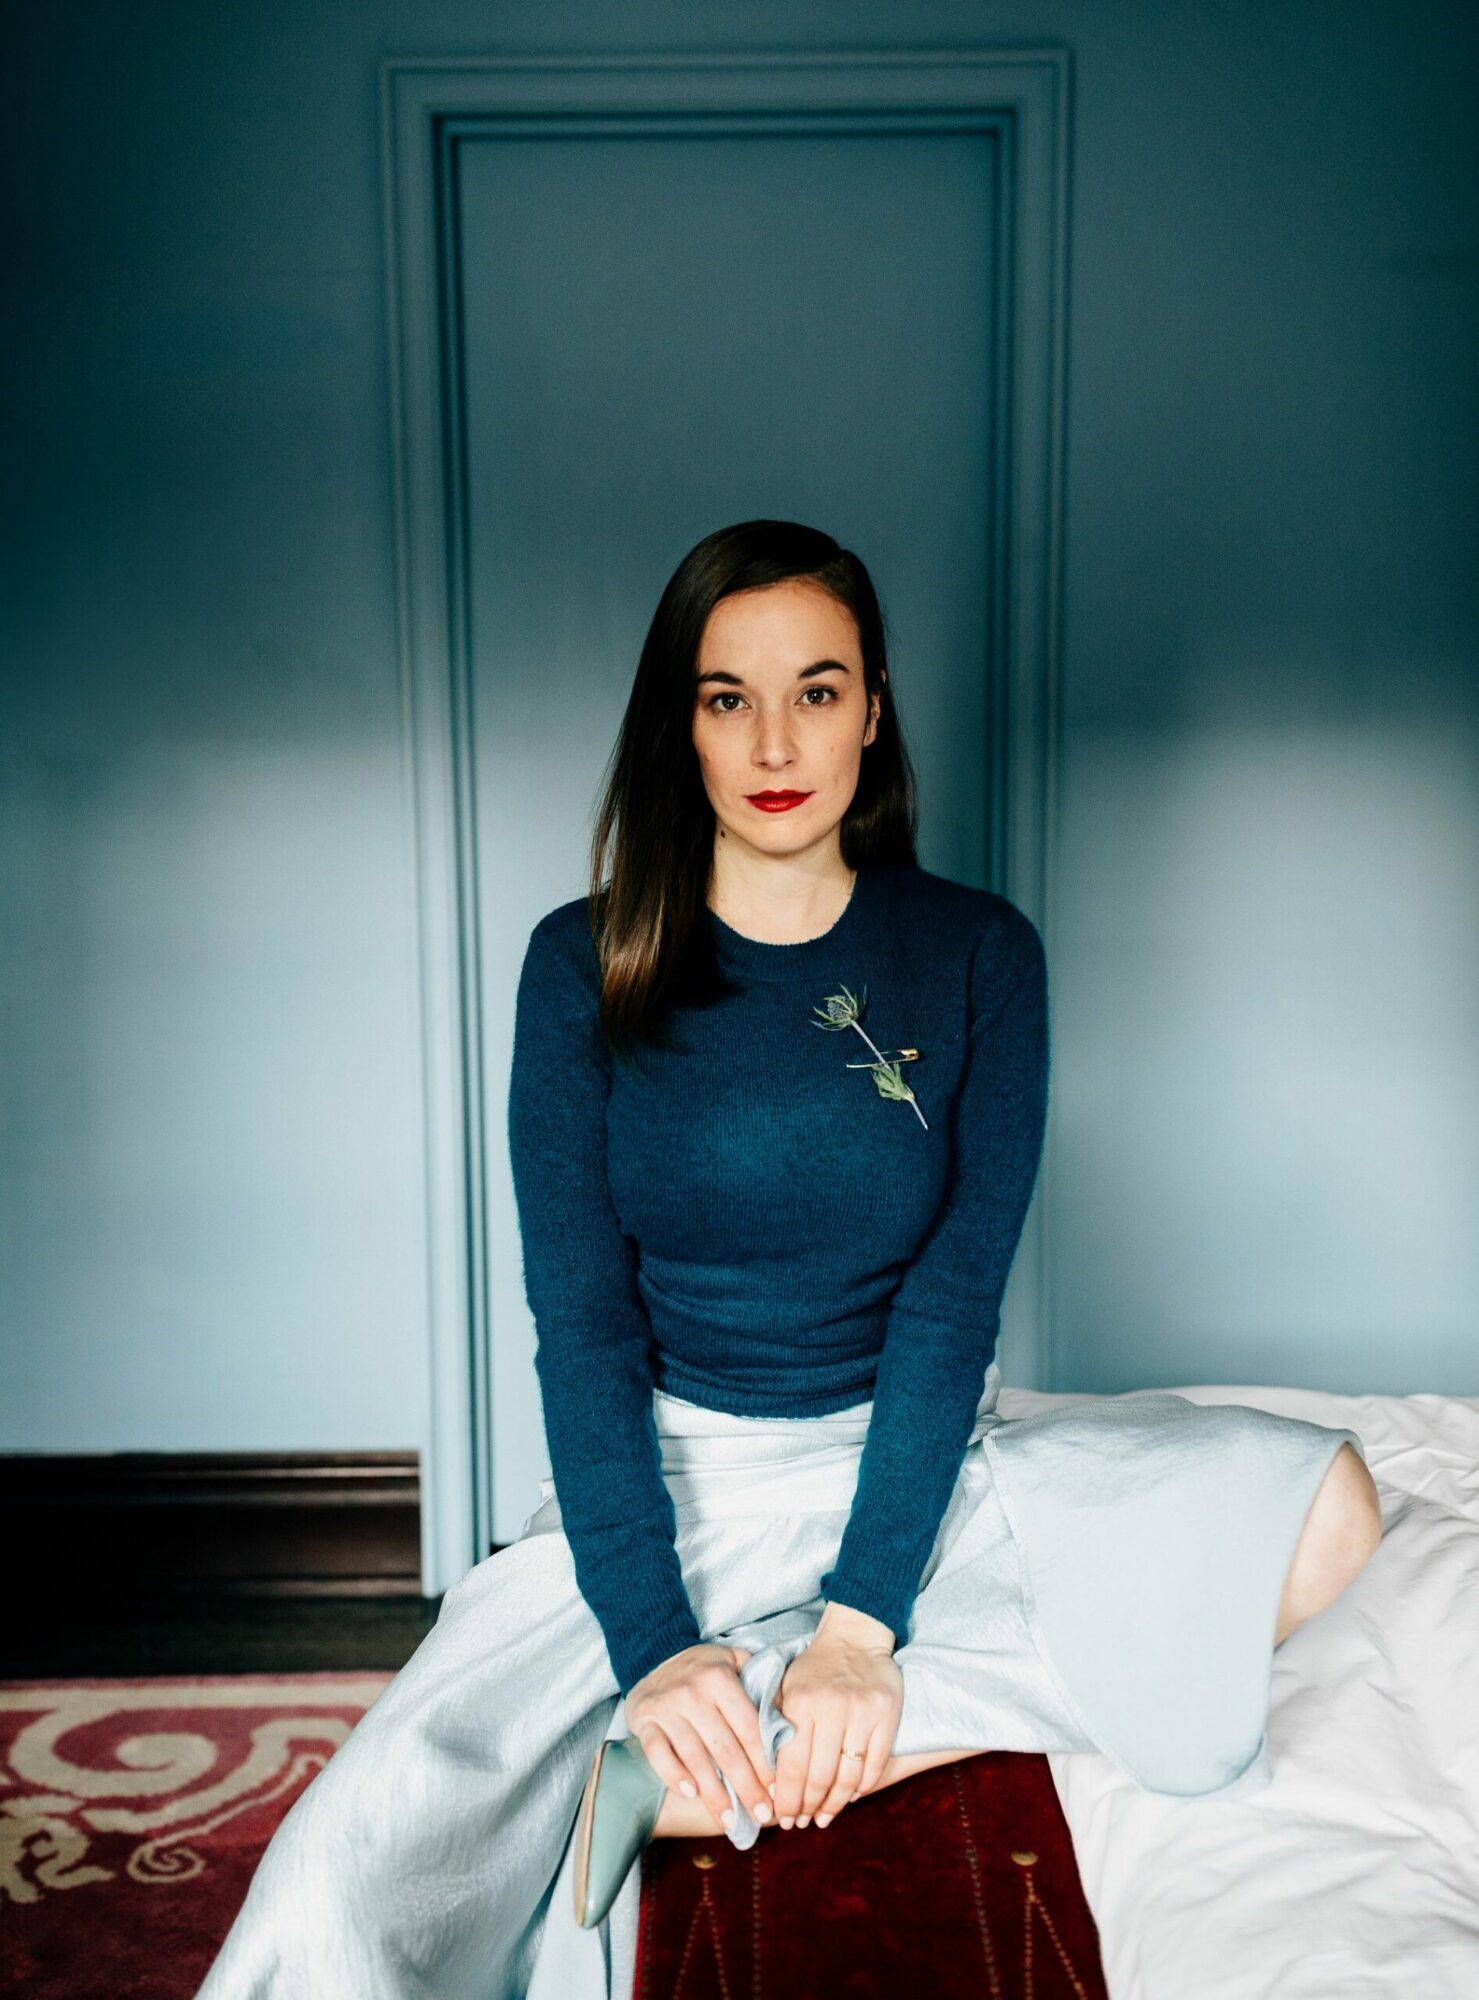 Image name Margaret Glaspy at Brudenell Social Club Leeds scaled the 17 image from the post Margaret Glaspy at Brudenell Social Club, Leeds in Yorkshire.com.